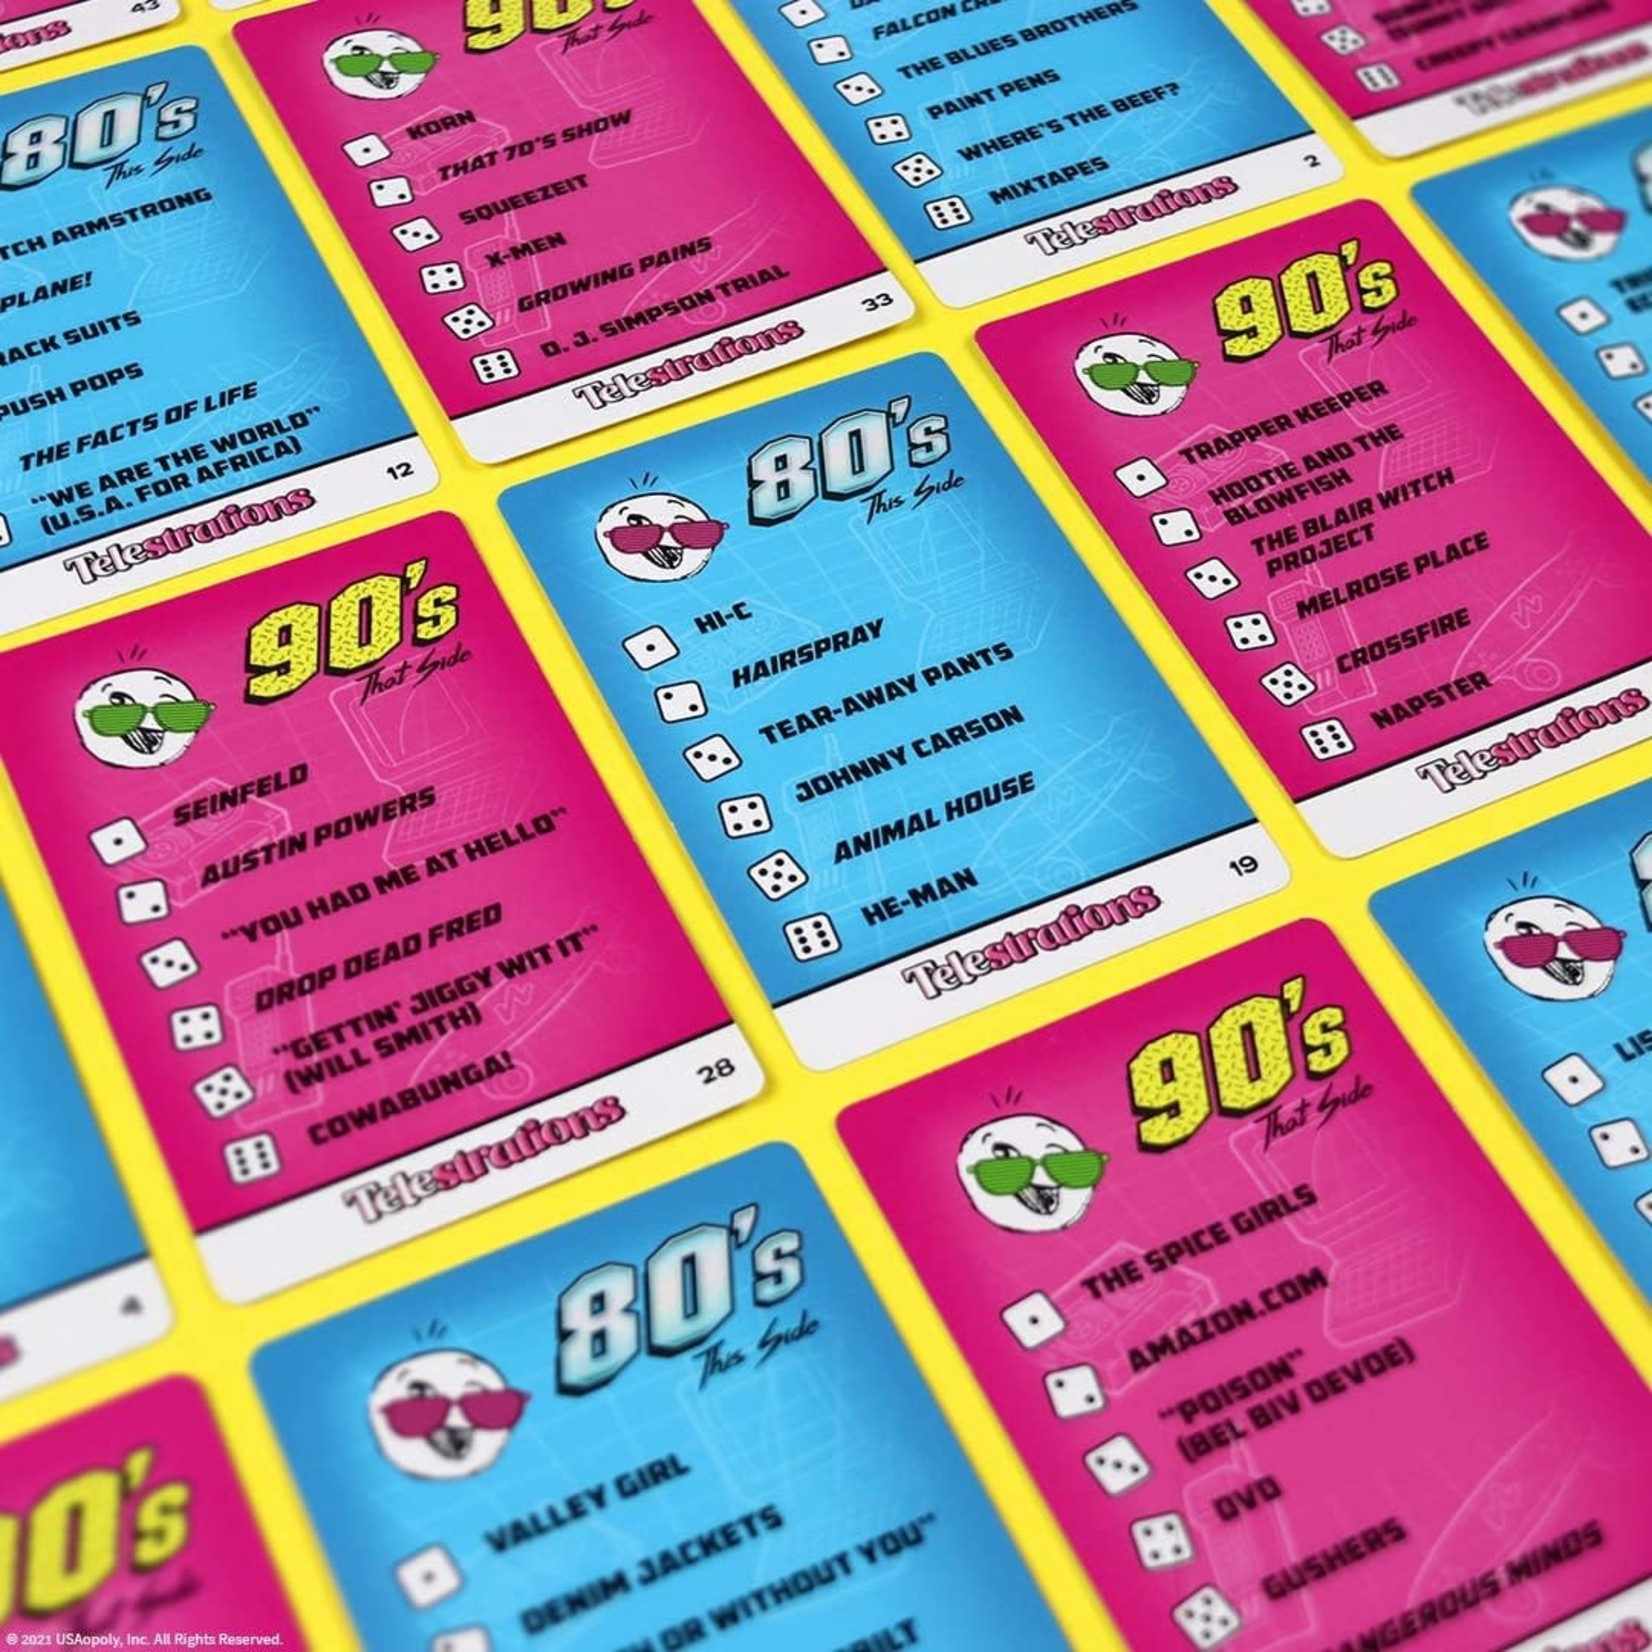 The Op Telestrations: 80's & 90's Expansion Pack